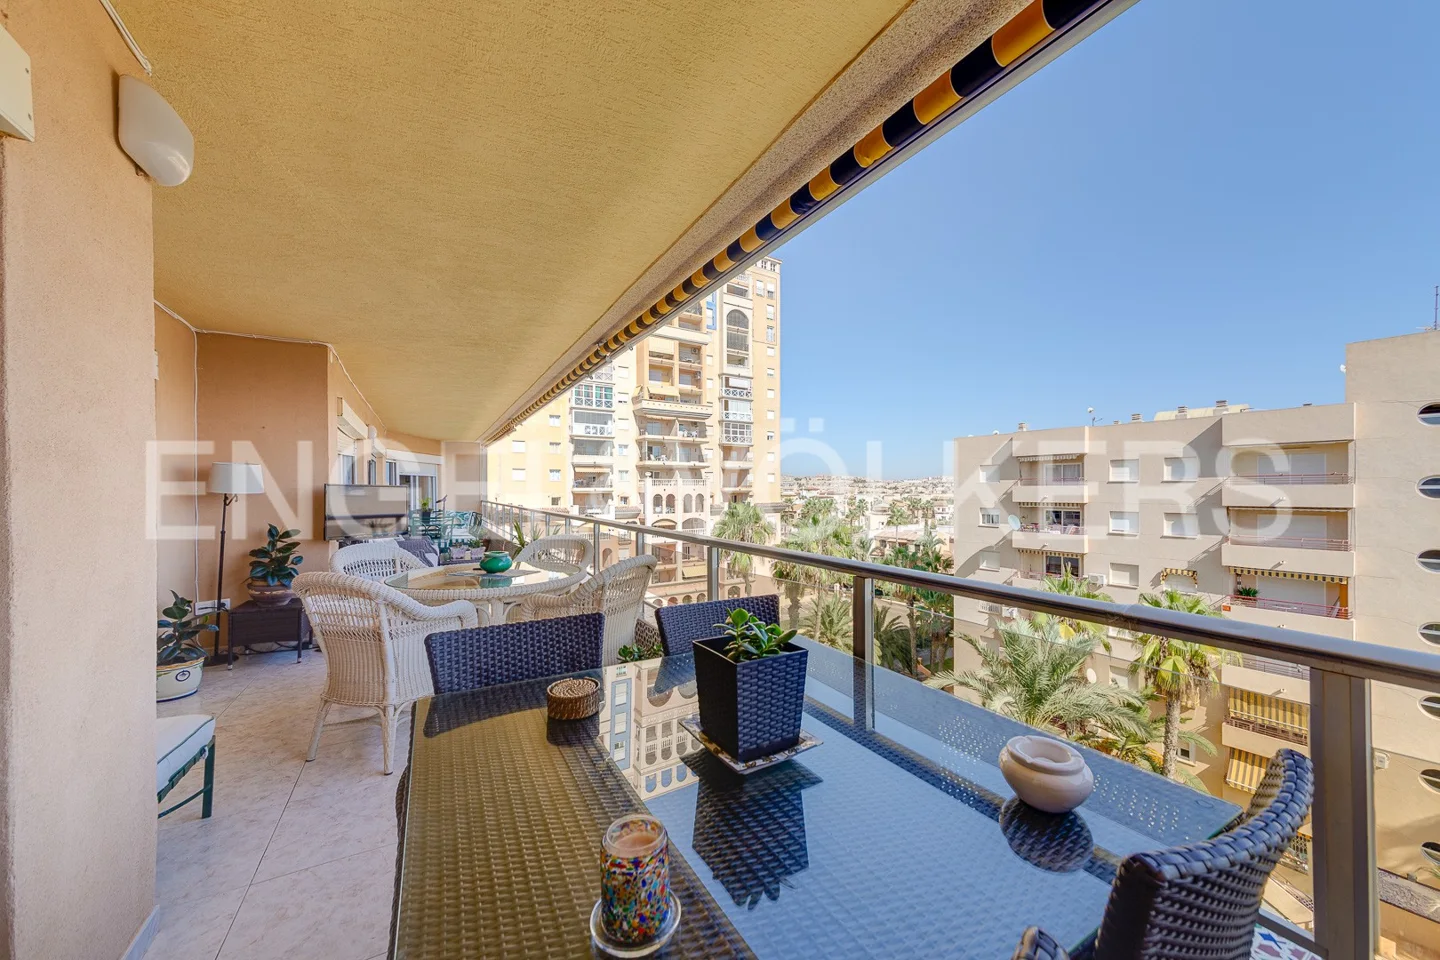 Apartment in the Palmeral urbanisation on Los Locos beach